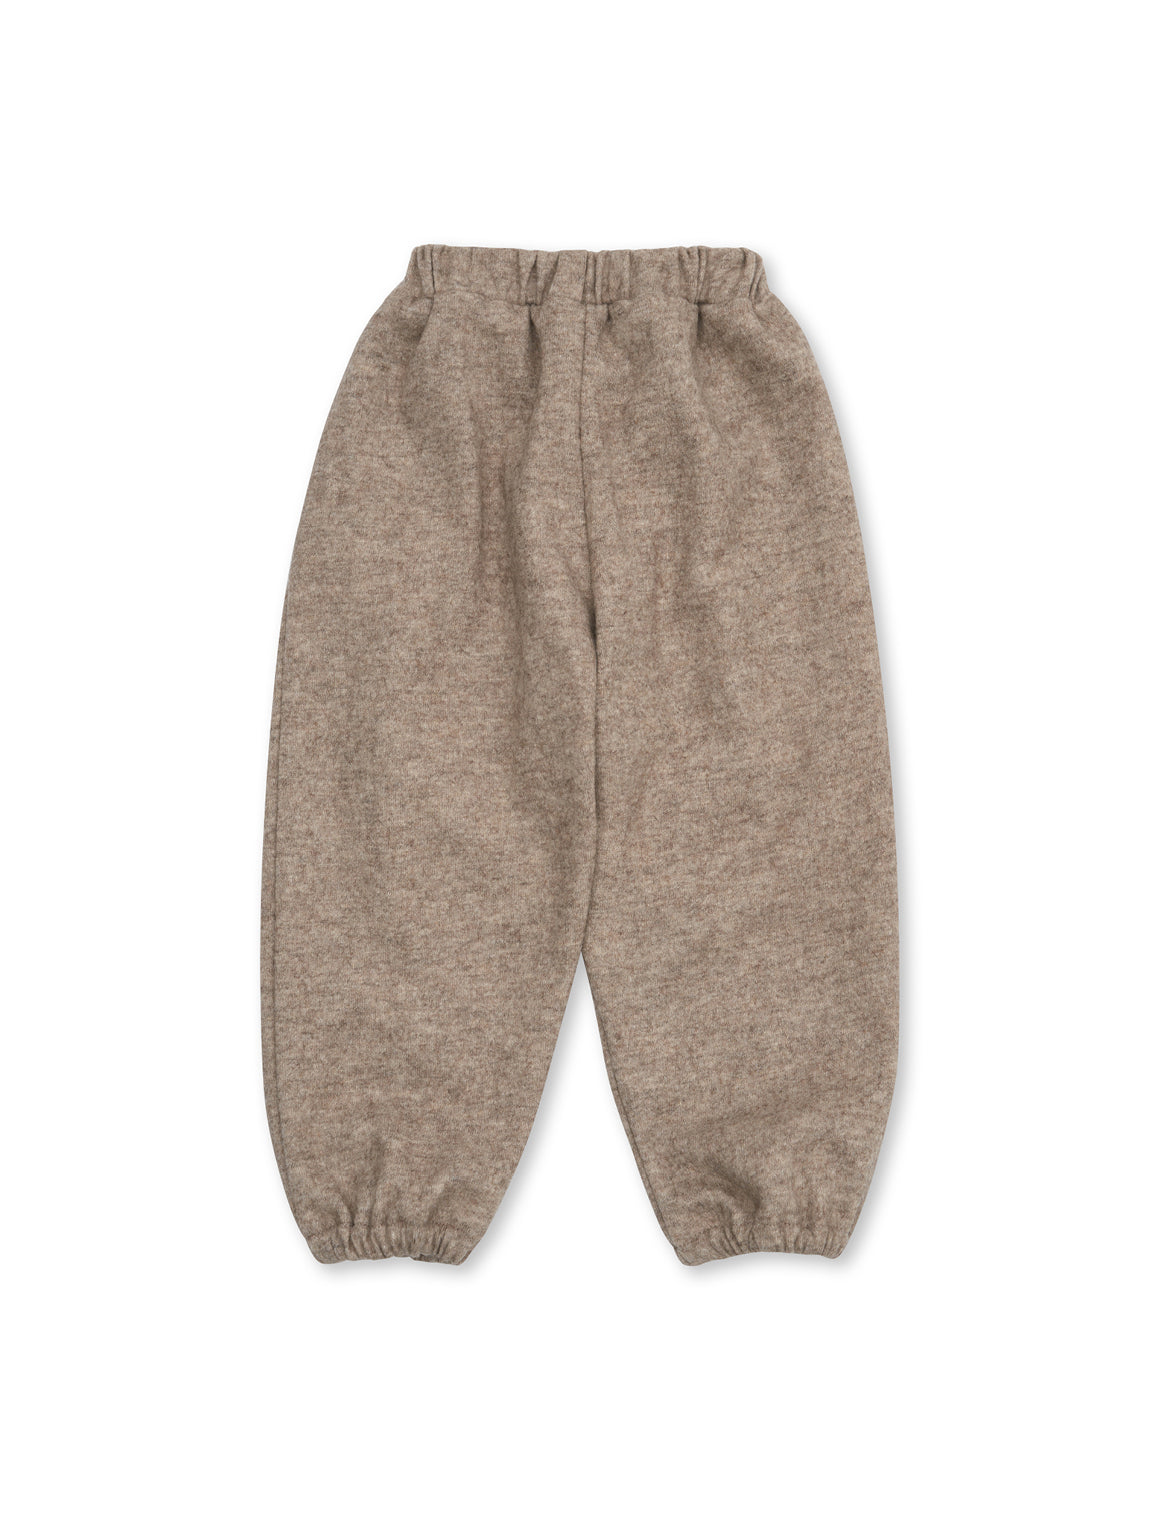 Boys' Designer Pants, oatmeal, wool/polyester blend, ages 1 to 6.